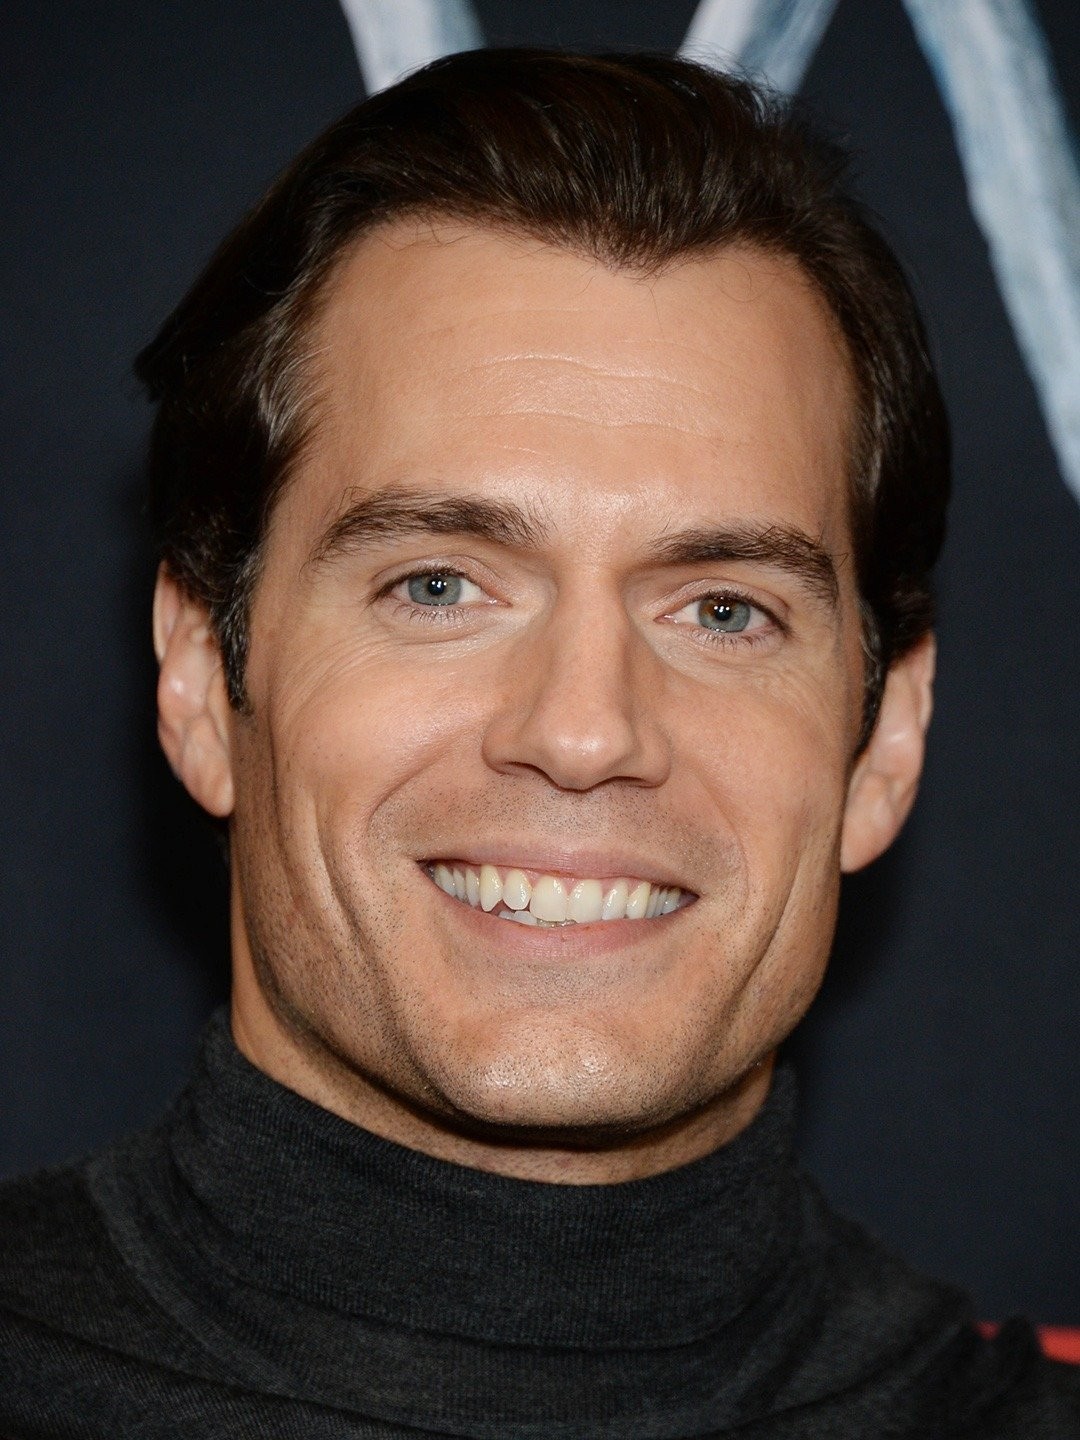 Who are Henry Cavill's brothers? Find out more about the star's family